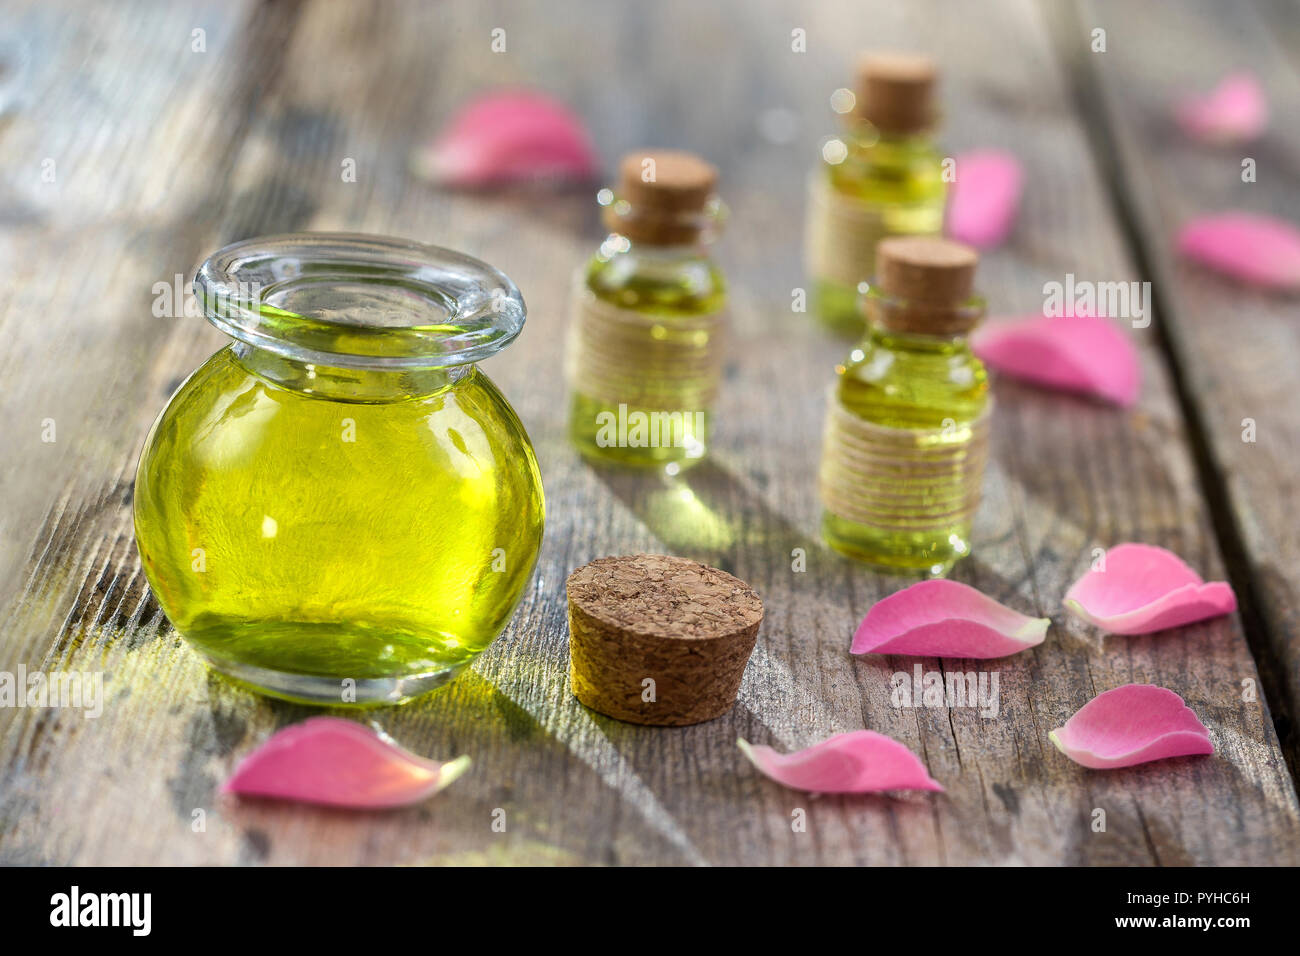 Rose flower petals with aromatherapy essential oil glass bottle isolated over wooden, background, copy-space Stock Photo